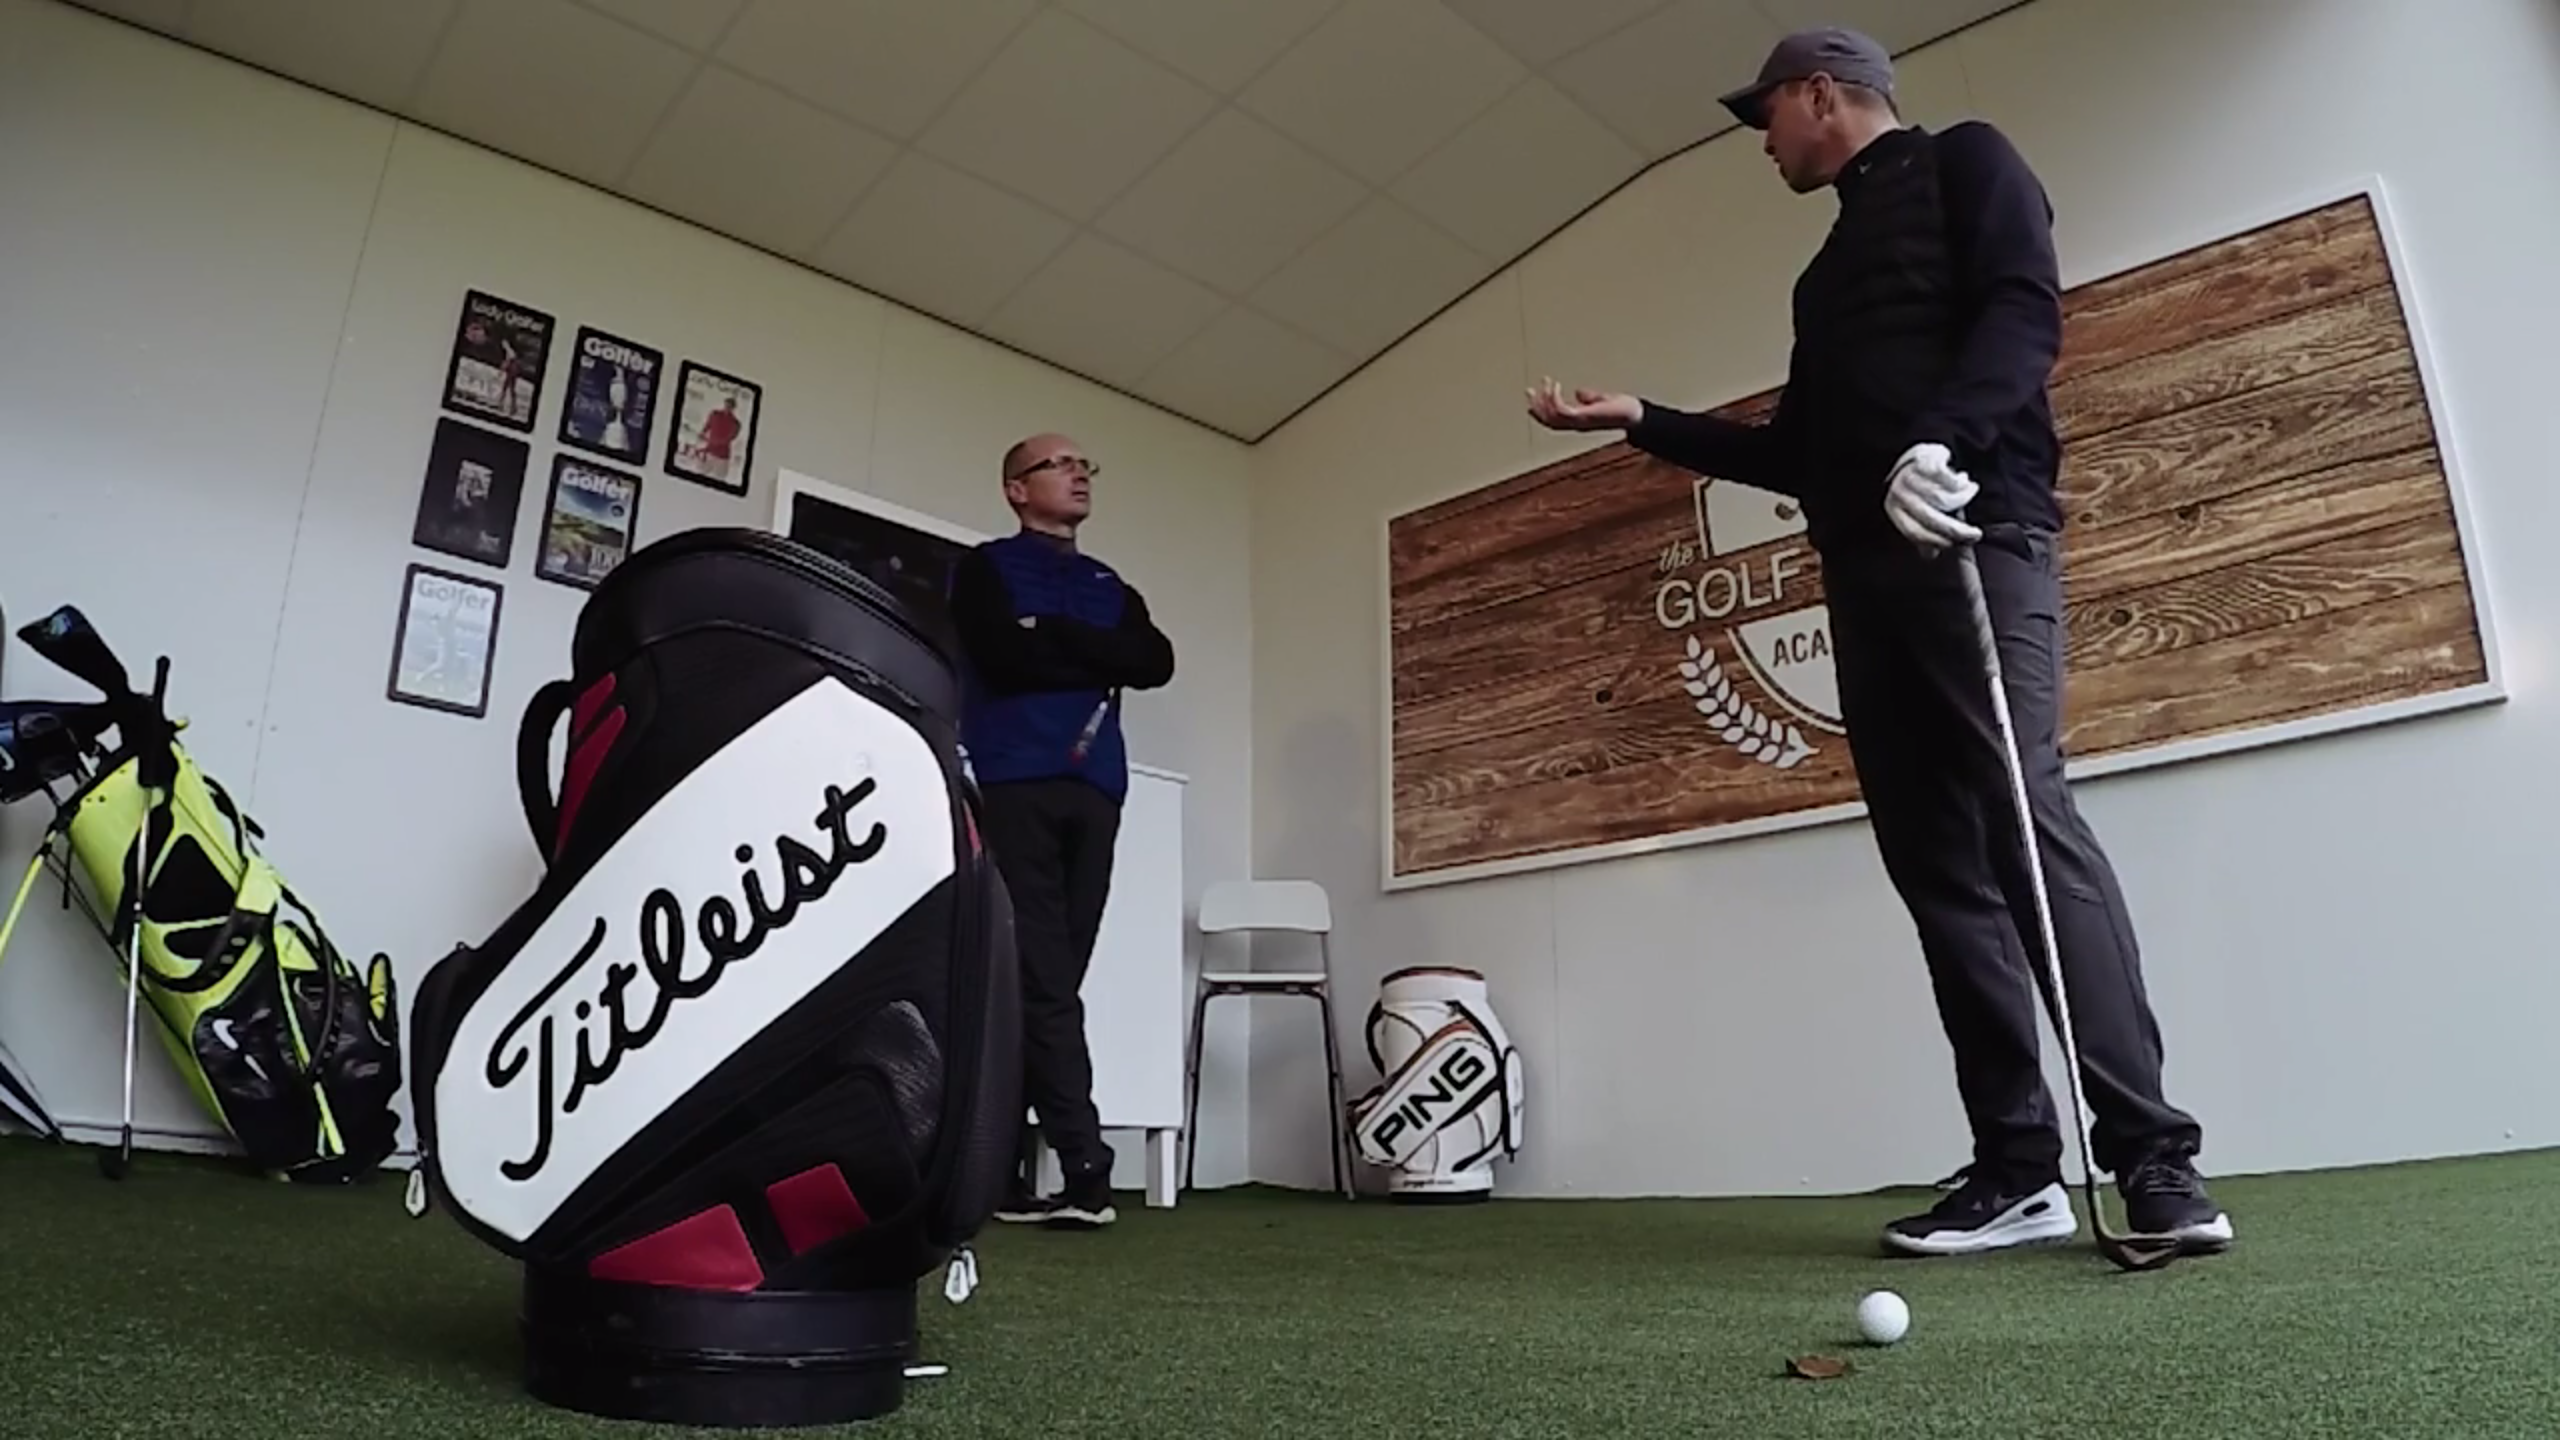 Ali Taylor: How to maximise spin with your wedges